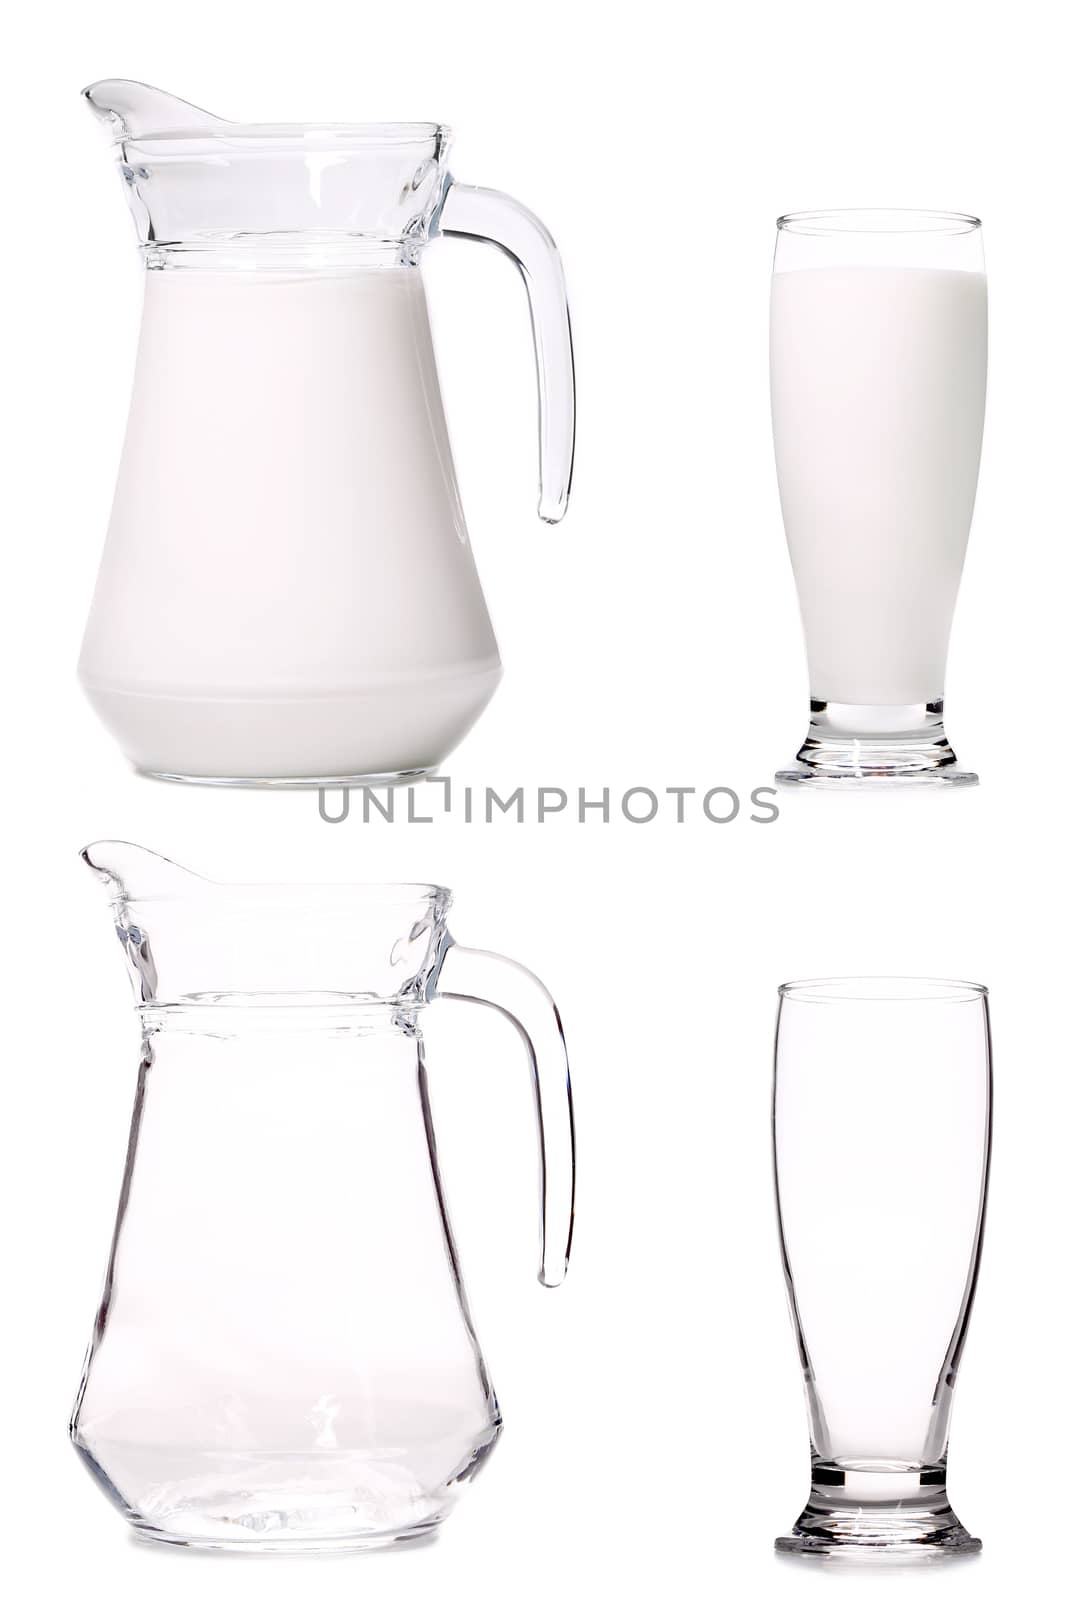 Pitcher and glass of milk. Isolated on a white background.